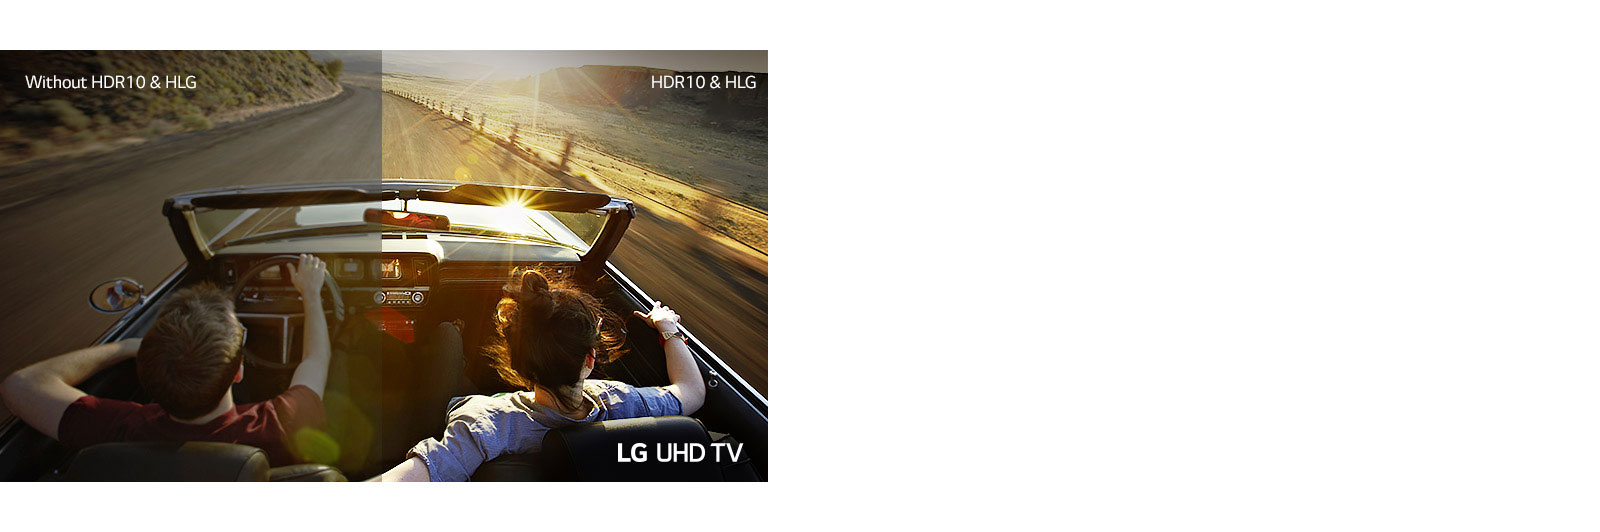 A couple in a car driving down a road. Half is shown on a conventional screen shown with poor picture quality. The other half shown with crisp, vivid LG UHD TV picture quality.